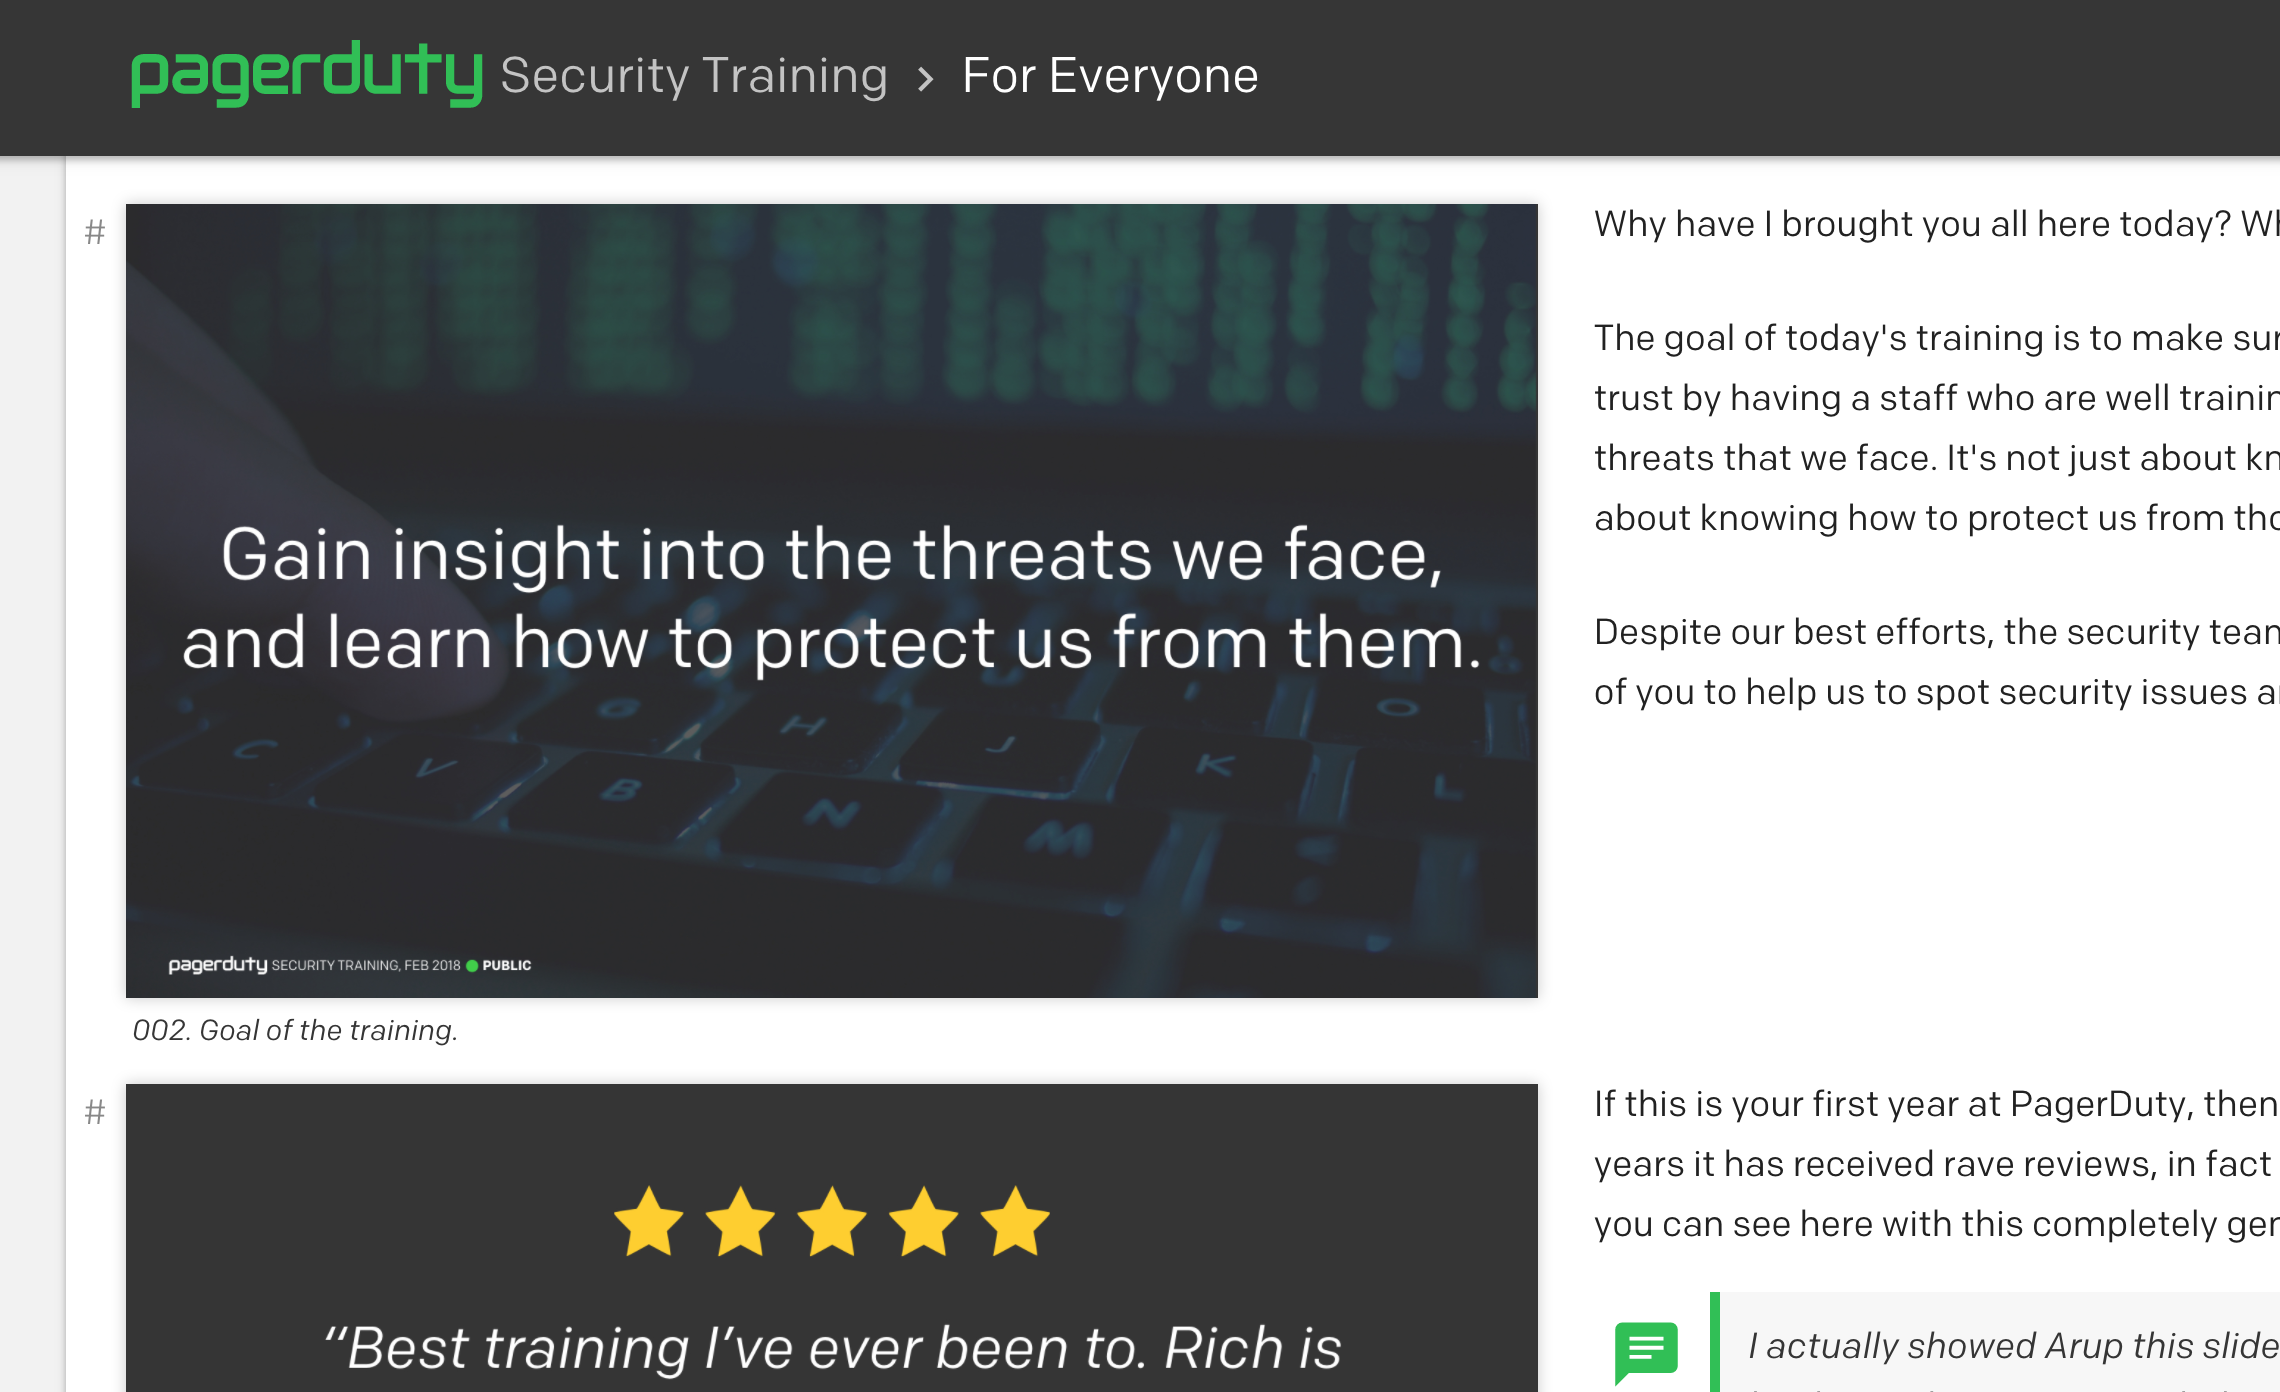 PagerDuty Security Training